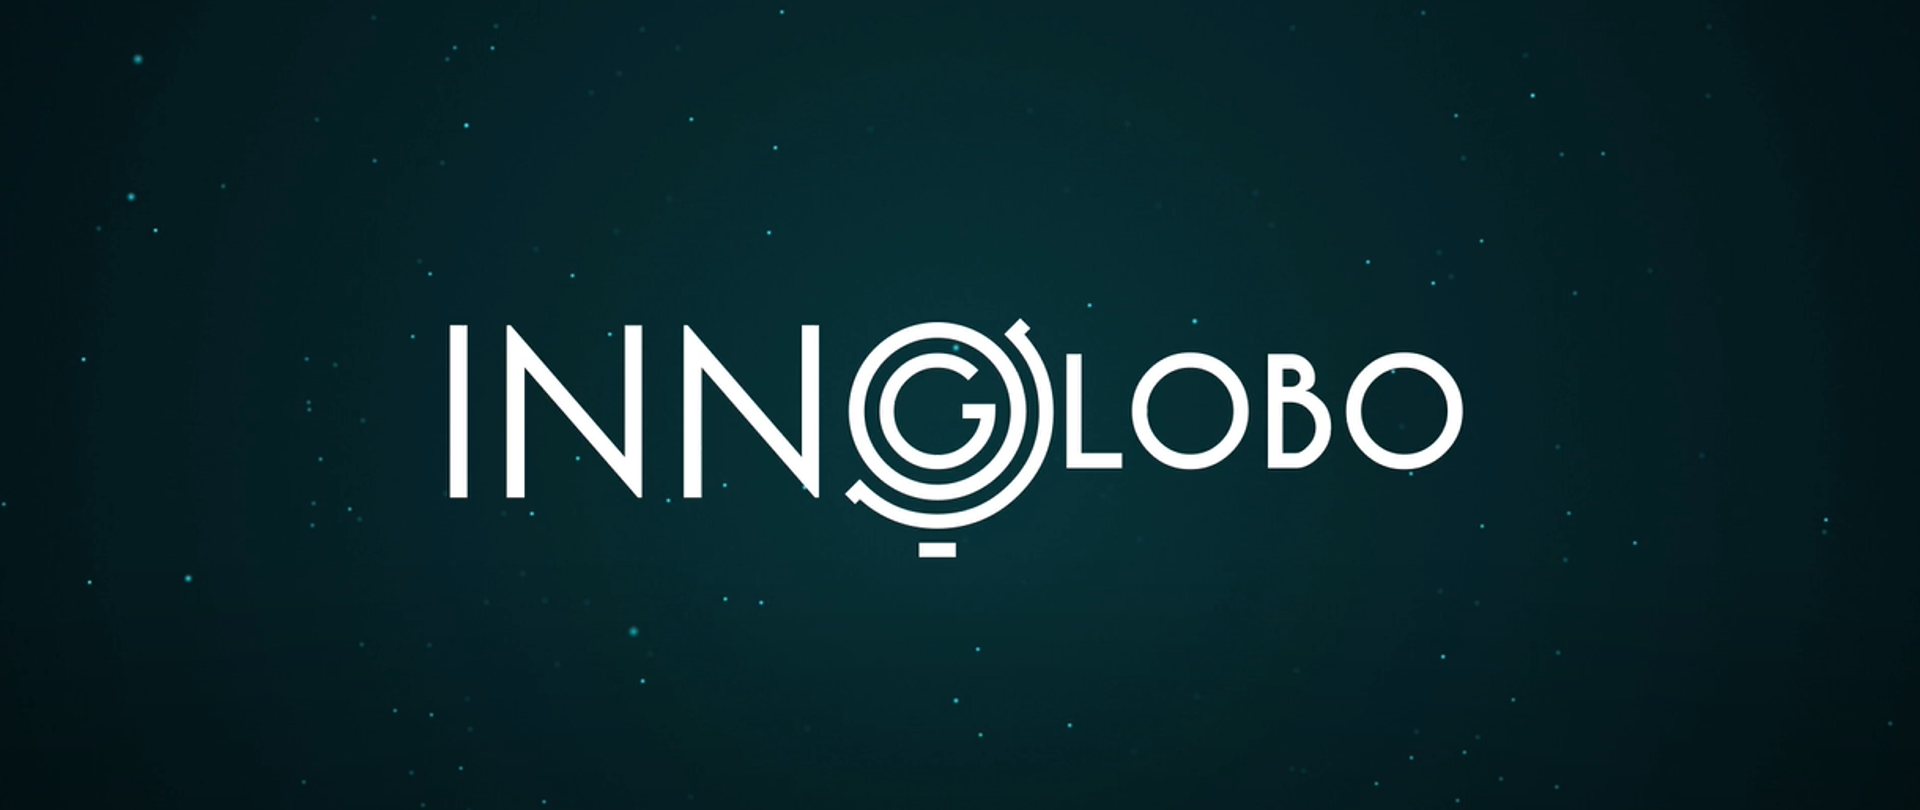 INNOGLOBO: Building the global research dialogue
